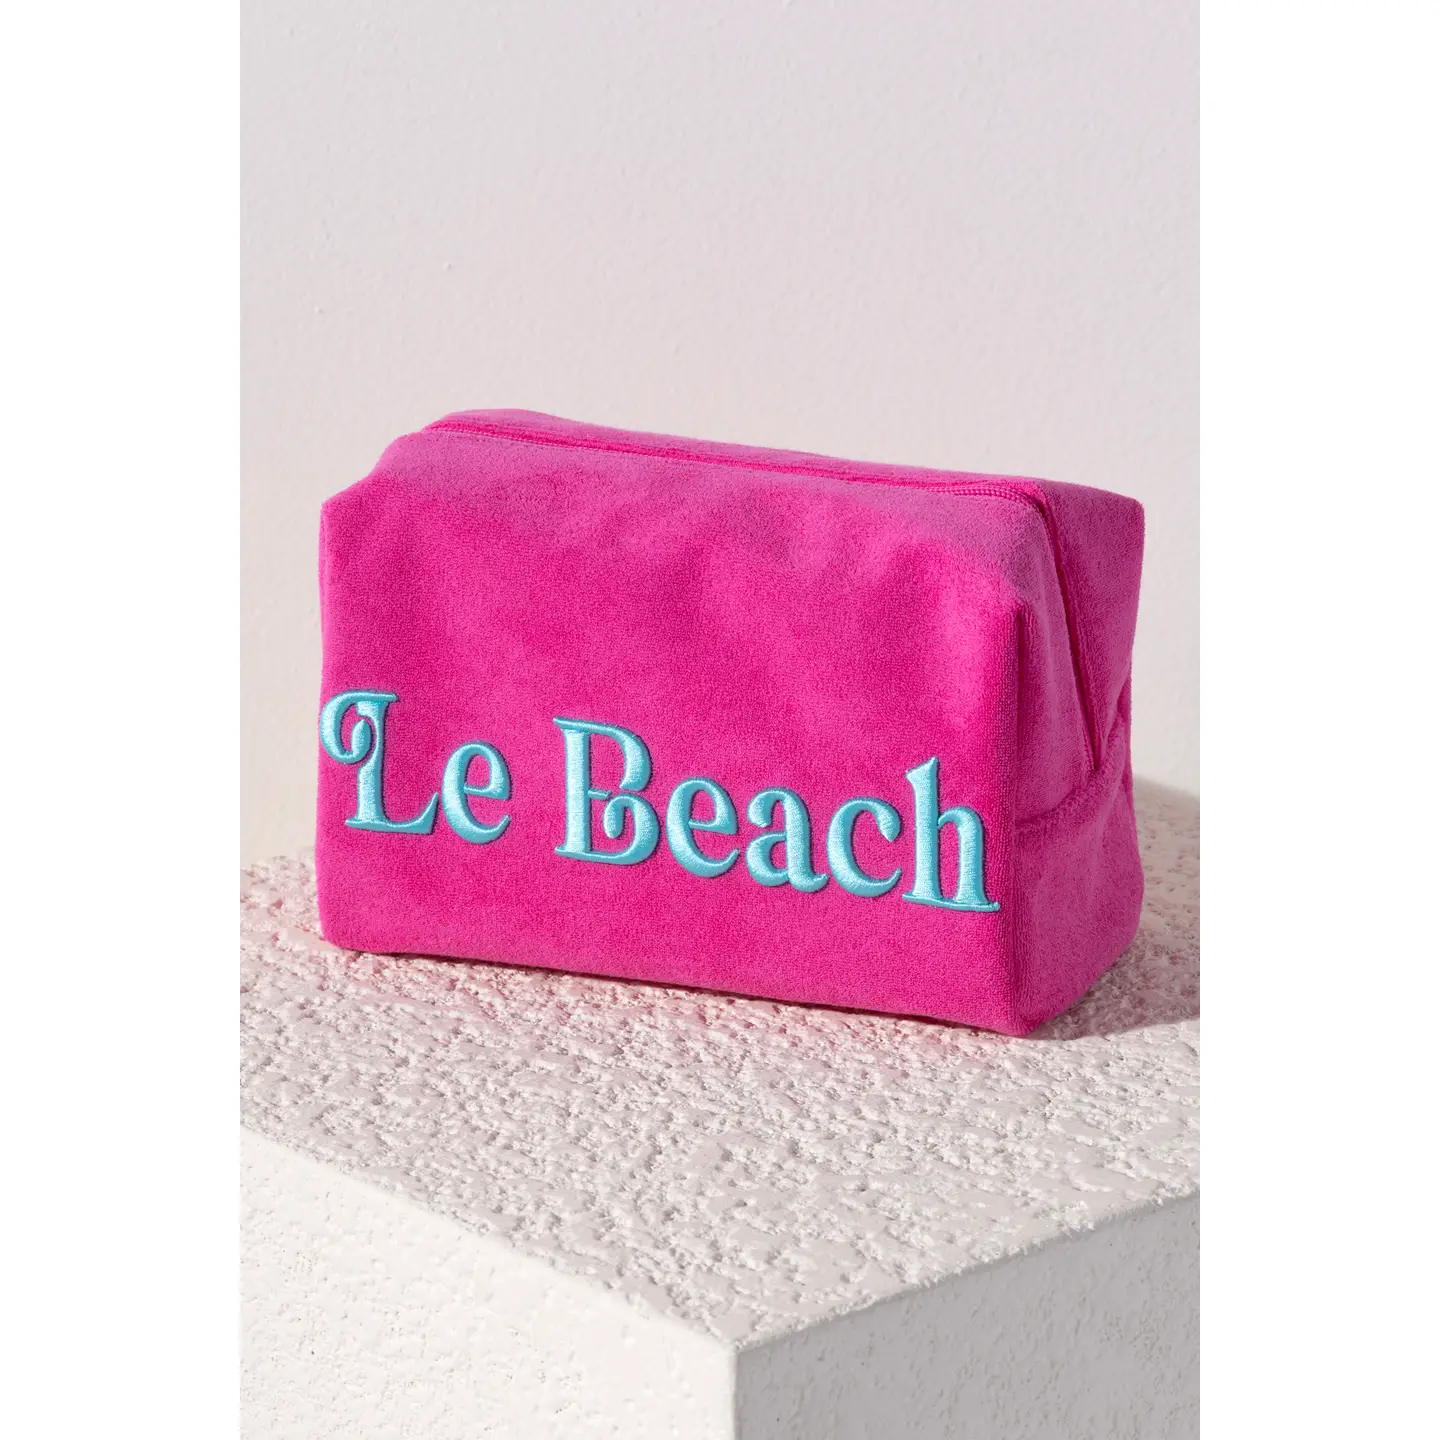 LE BEACH ZIP POUCH IN PINK